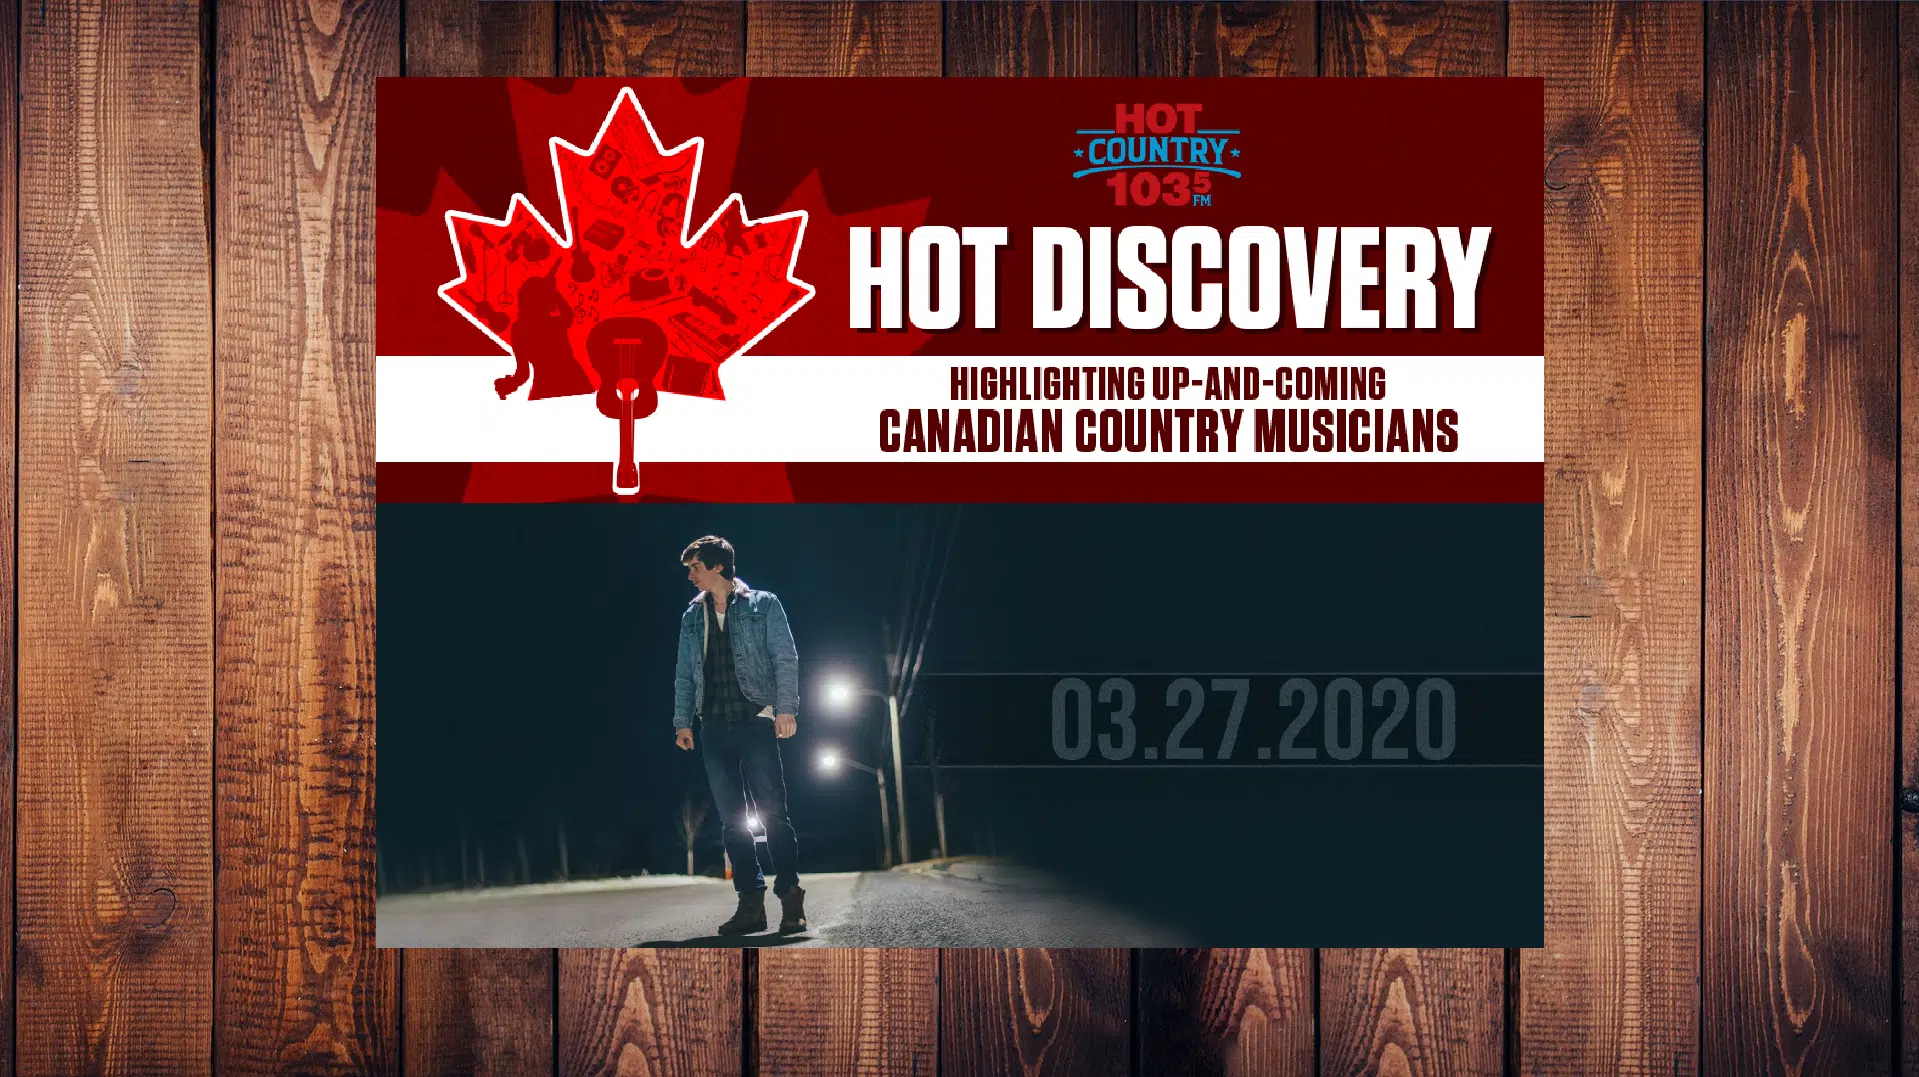 Tye Dempsey On This Week's Hot Discovery